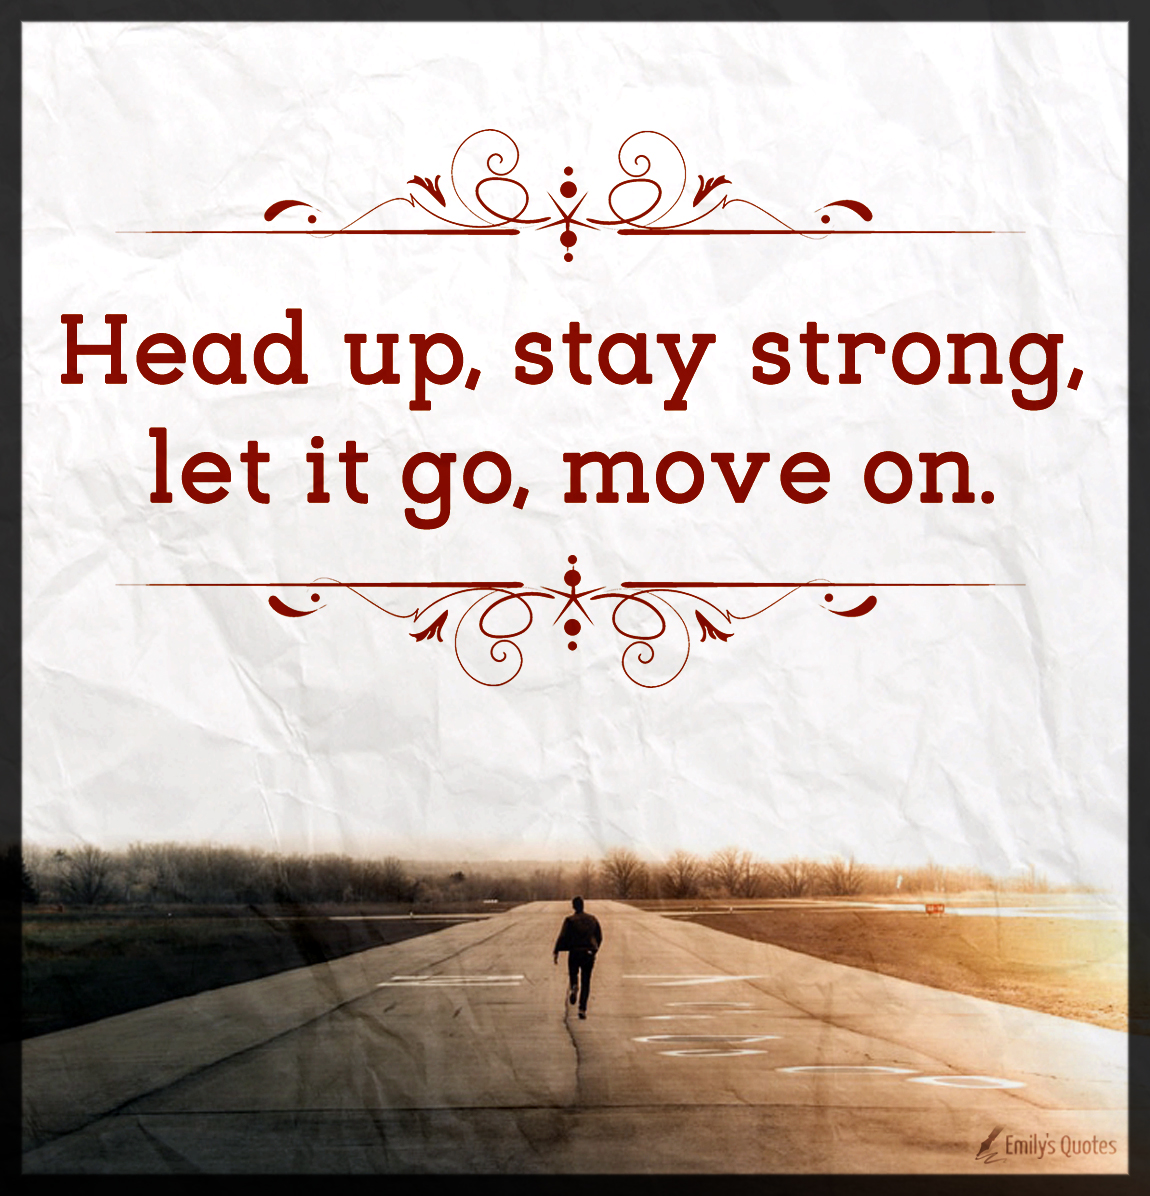 Head up, stay strong, let it go, move on | Popular inspirational quotes